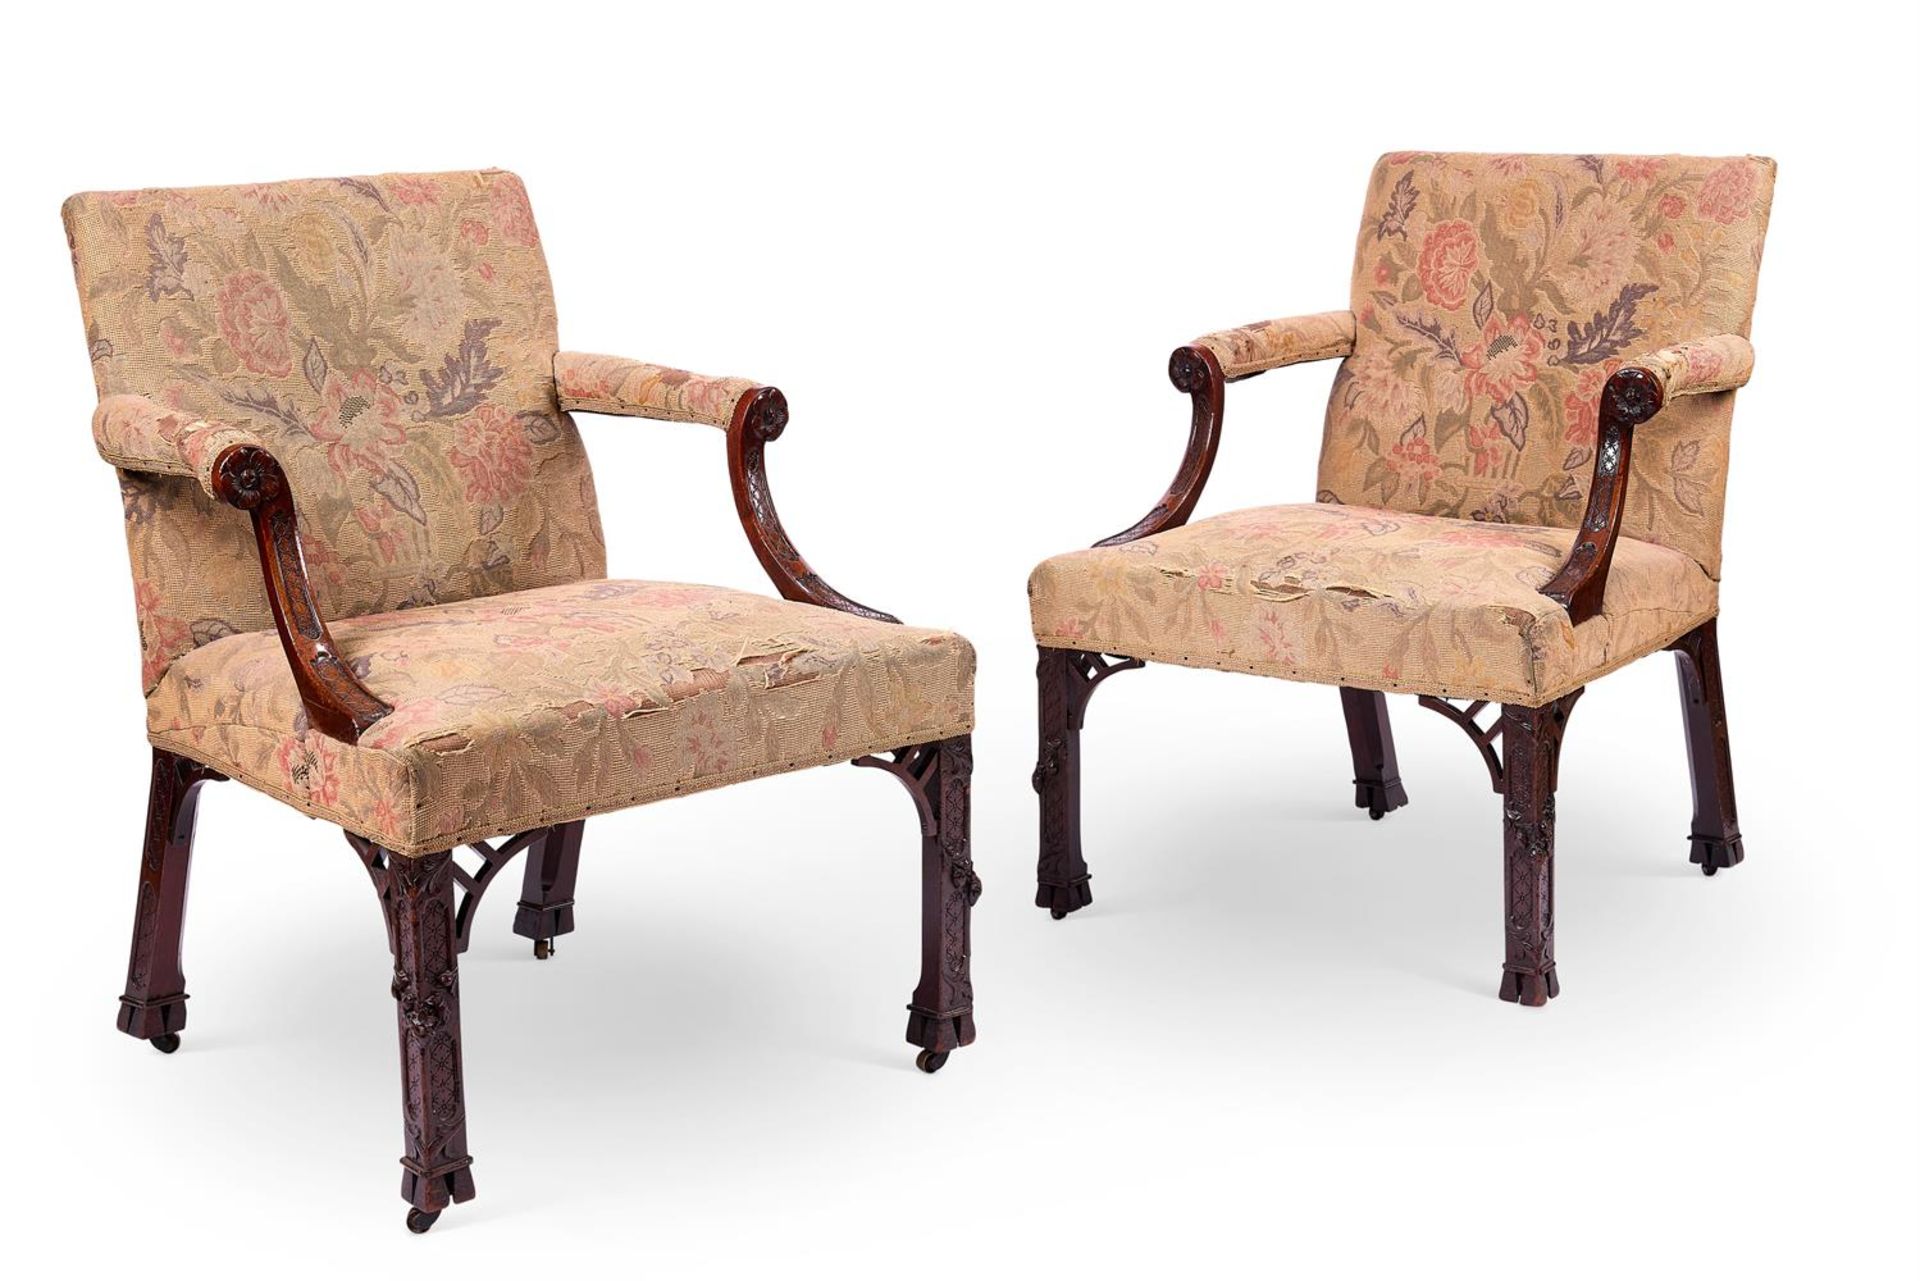 A PAIR OF GEORGE III STYLE MAHOGANY LIBRARY ARMCHAIRS